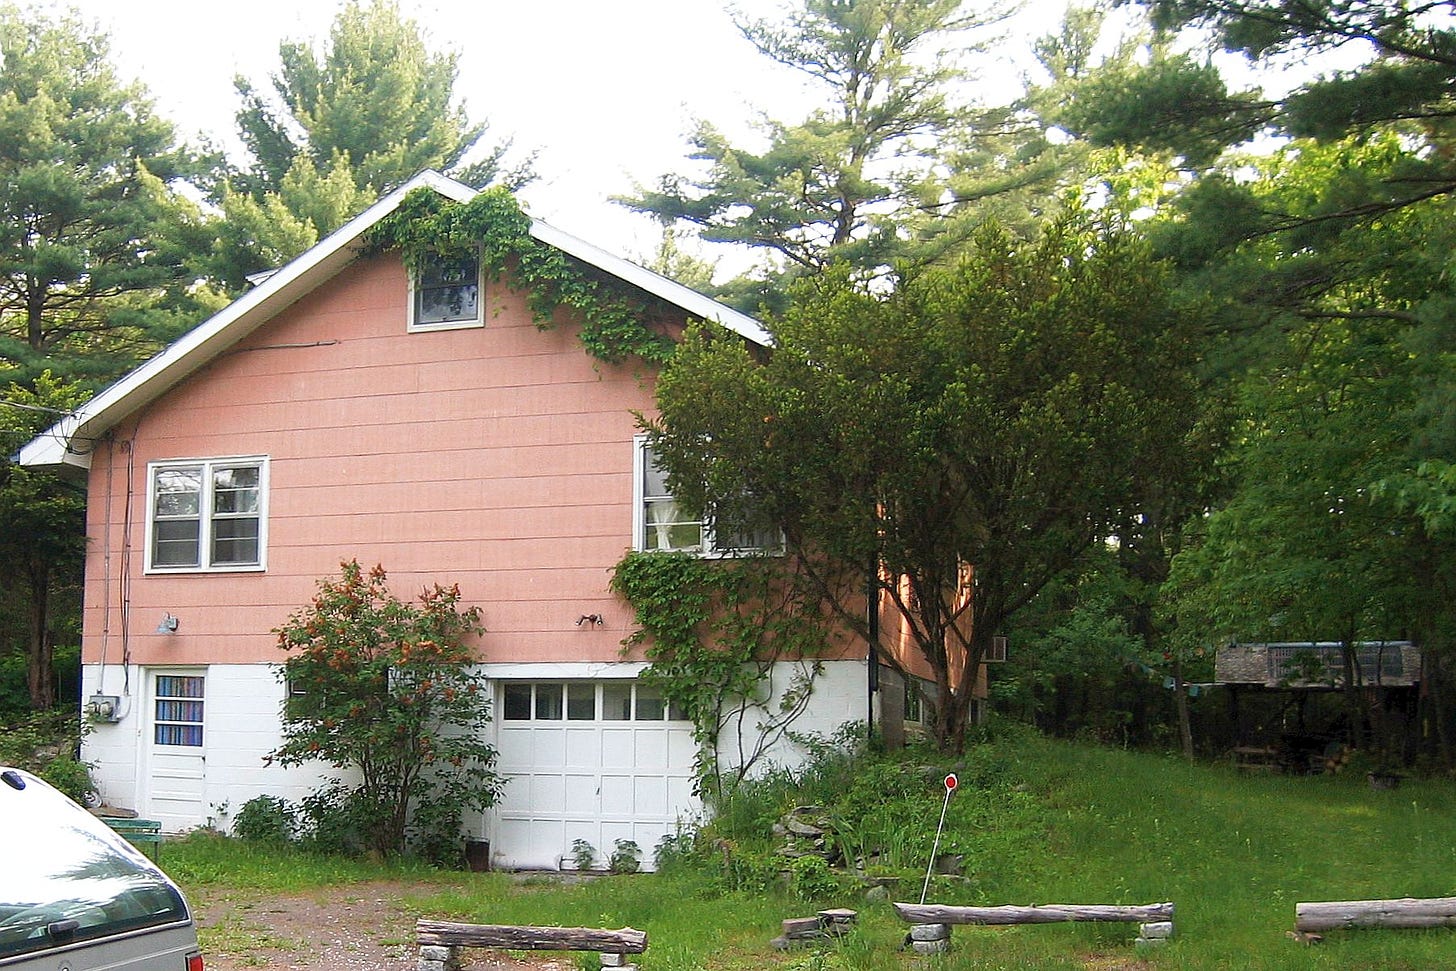 The Big Pink - the house used by 'The Band' to record the Brown album.